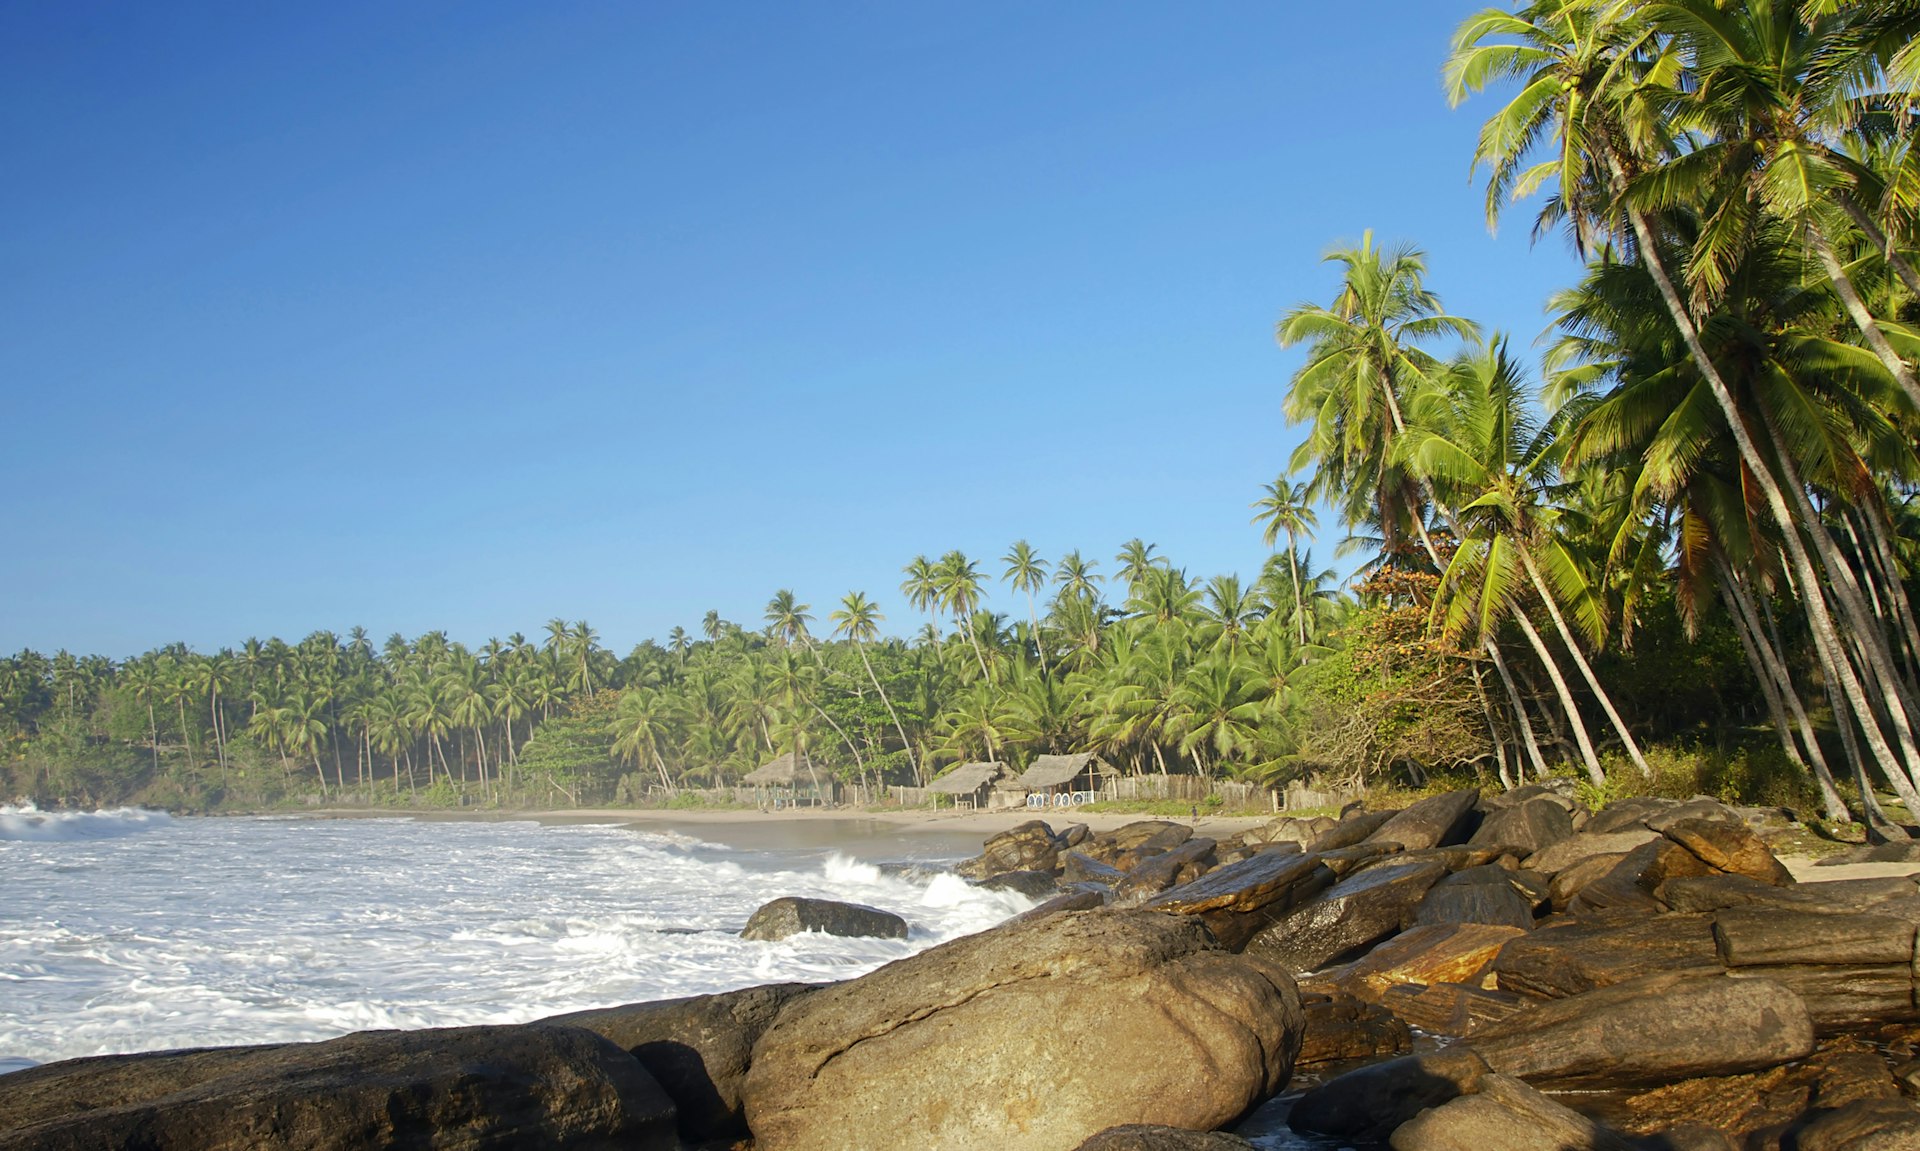 Beautiful tropical beach with boulders and palm trees lit by a morning sun in Tangalla, Sri Lanka.